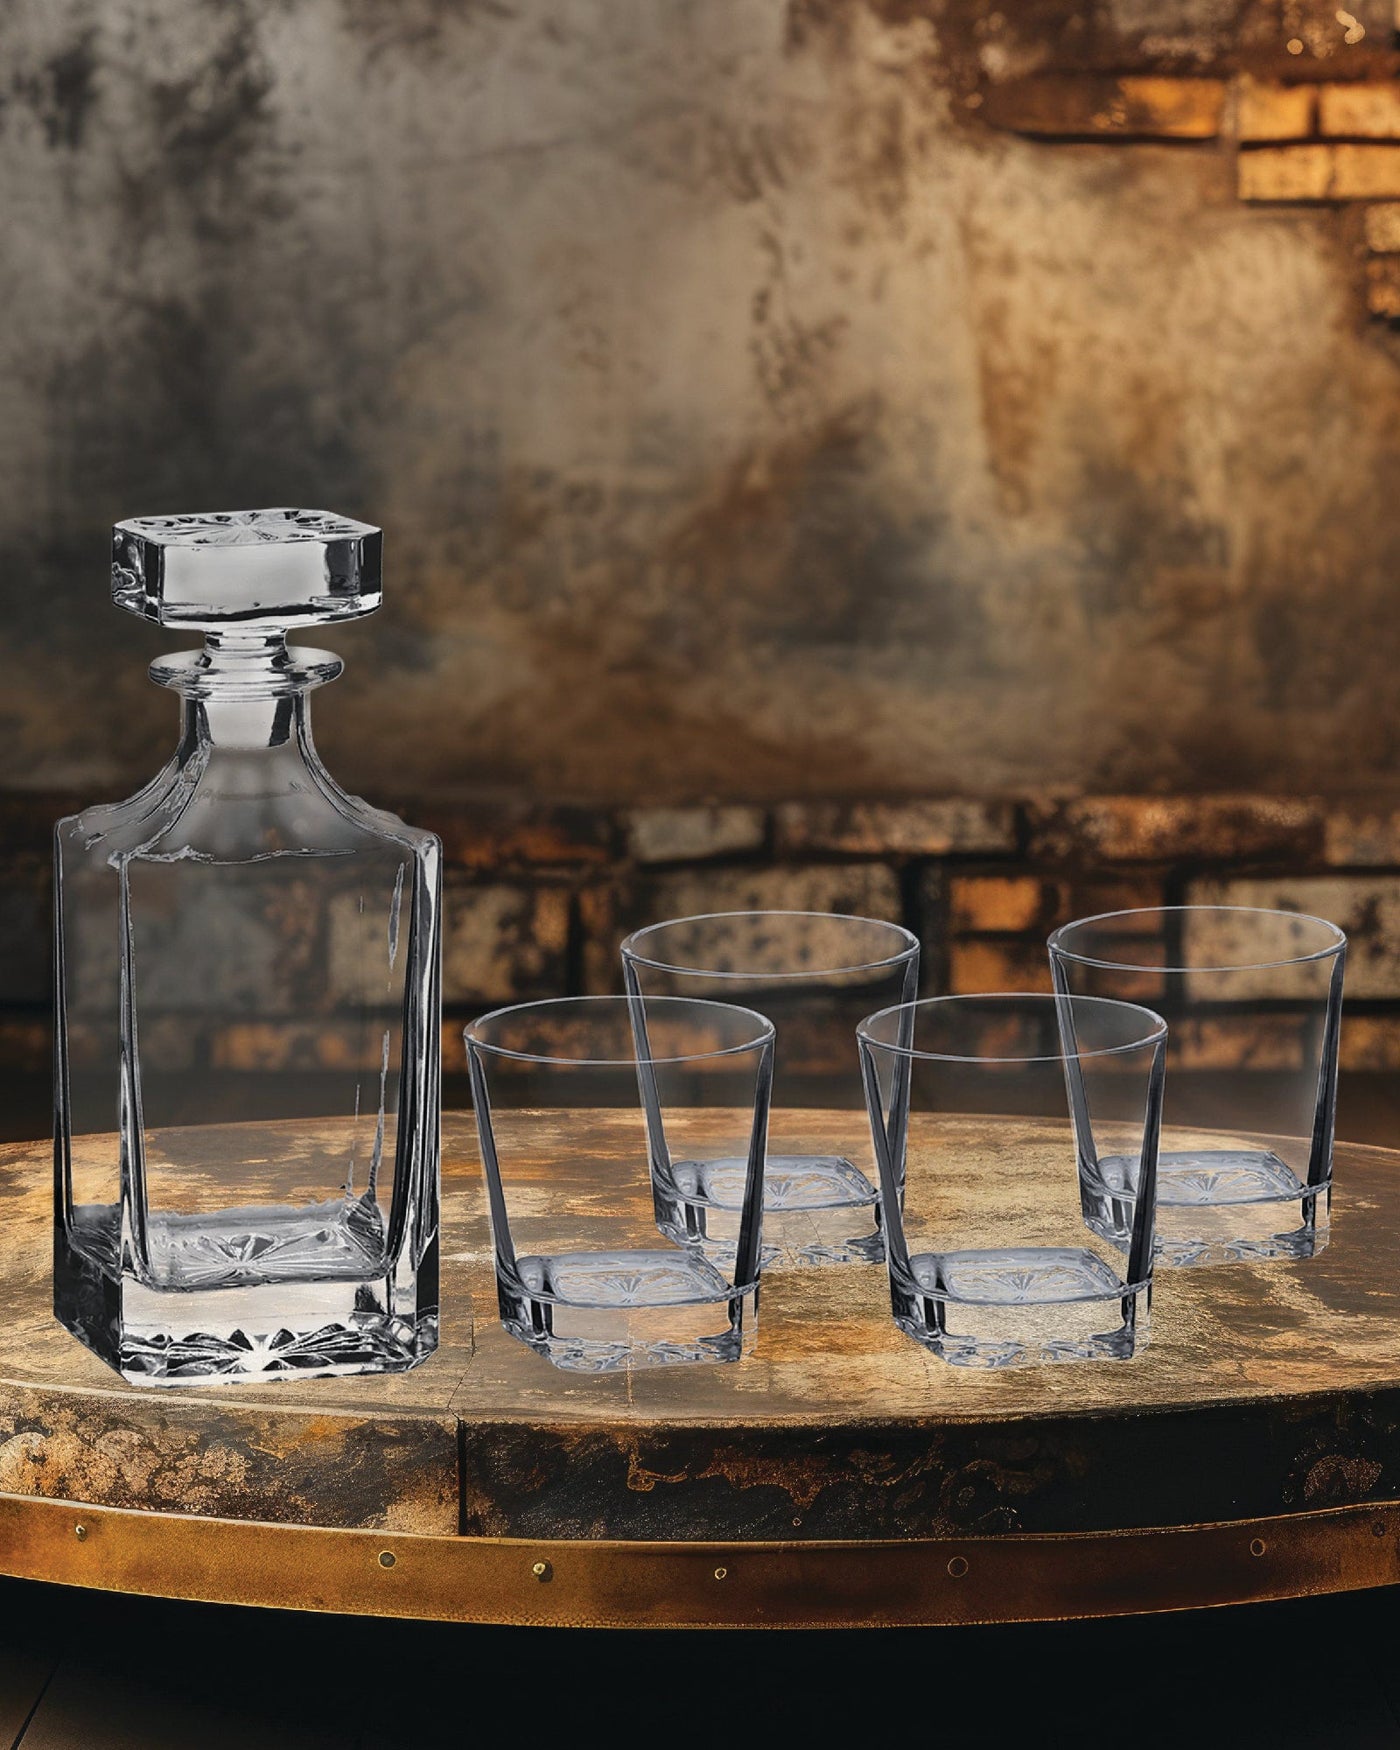 Personalized Whiskey Decanter Set - Gift Sets for Men: Groomsman Gift, Father's Day Gift, House Warming Gift, Wedding Gift - JJ's Party House: Custom Party Favors, Napkins & Cups